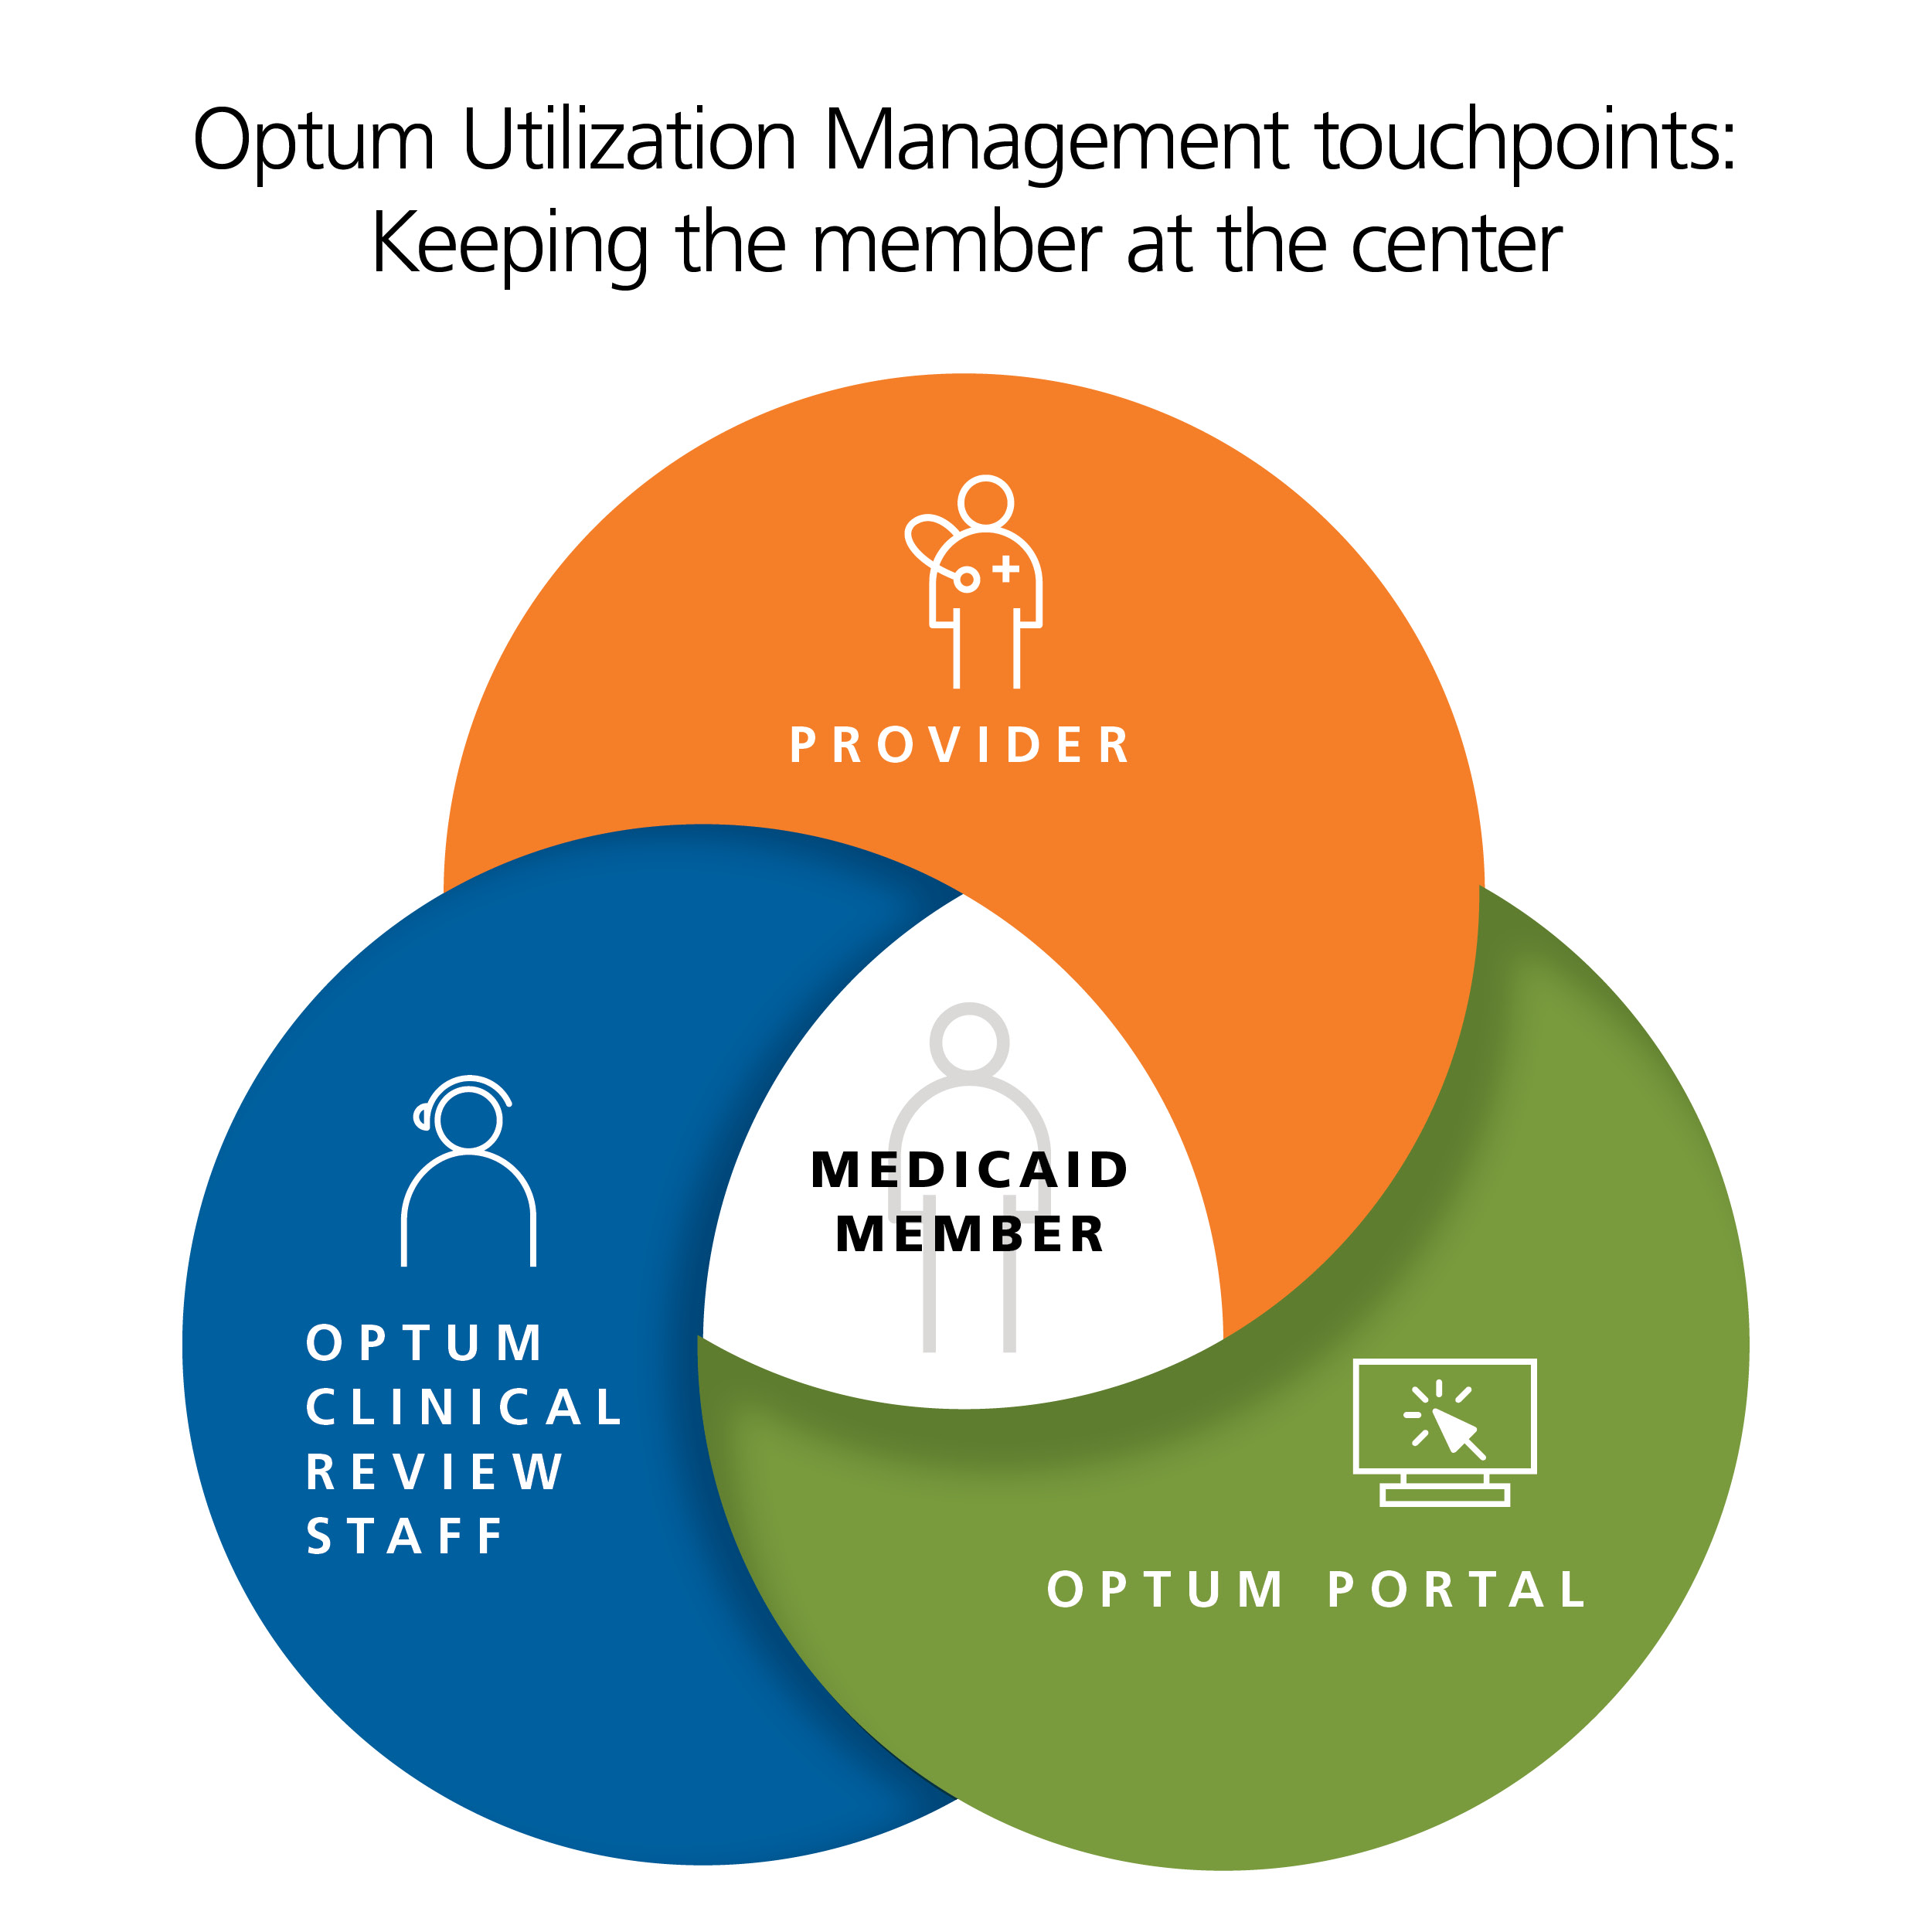 Medicaid member is supported by the provider, the Optum portal and Optum clinical review staff 